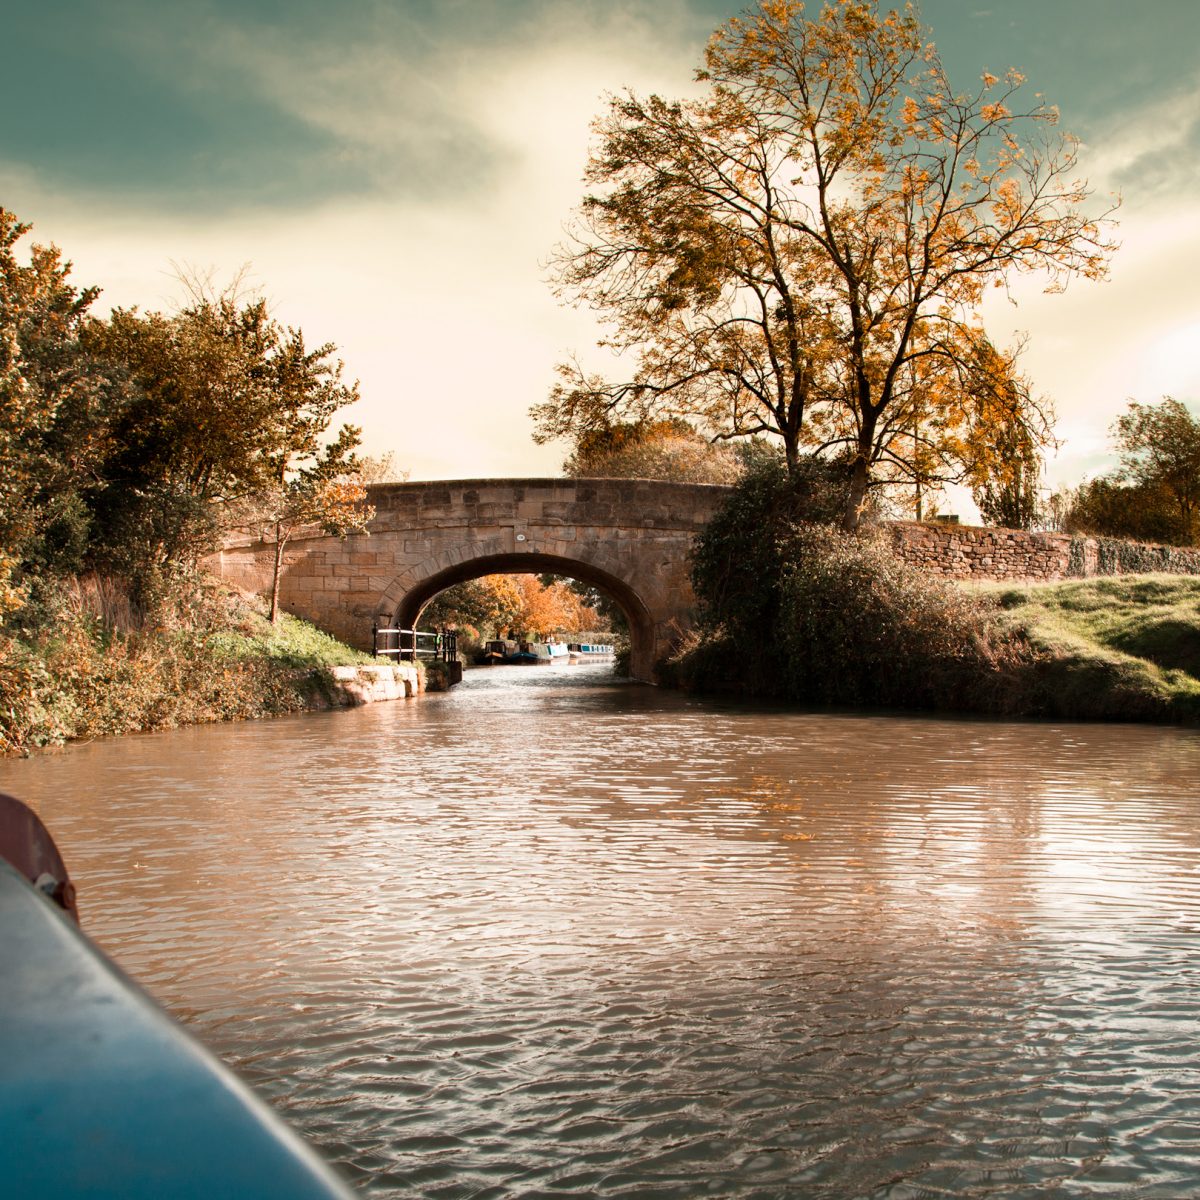 34. Narrowboat on the Kennet & Avon Canal